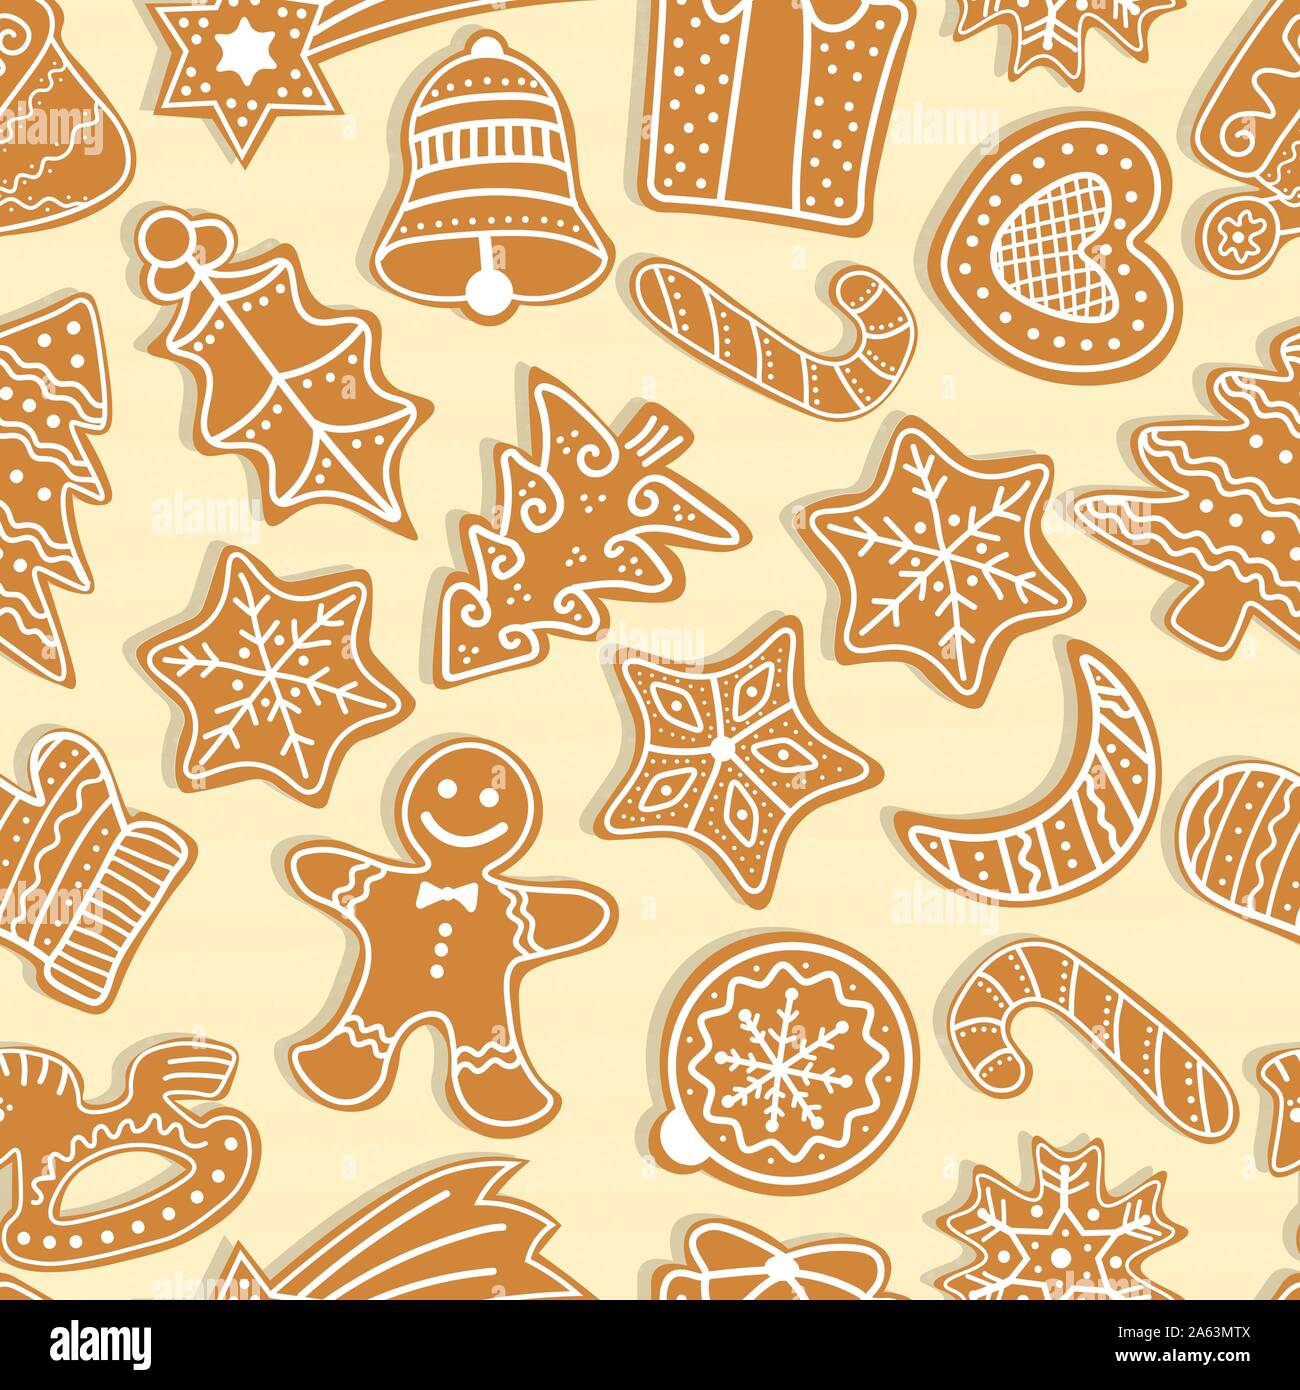 Gingerbread men and Christmas tree, star, bell, house, cane, heart, ball, crescent, present, mistletoe. Vector Christmas seamless pattern with gingerb Stock Vector